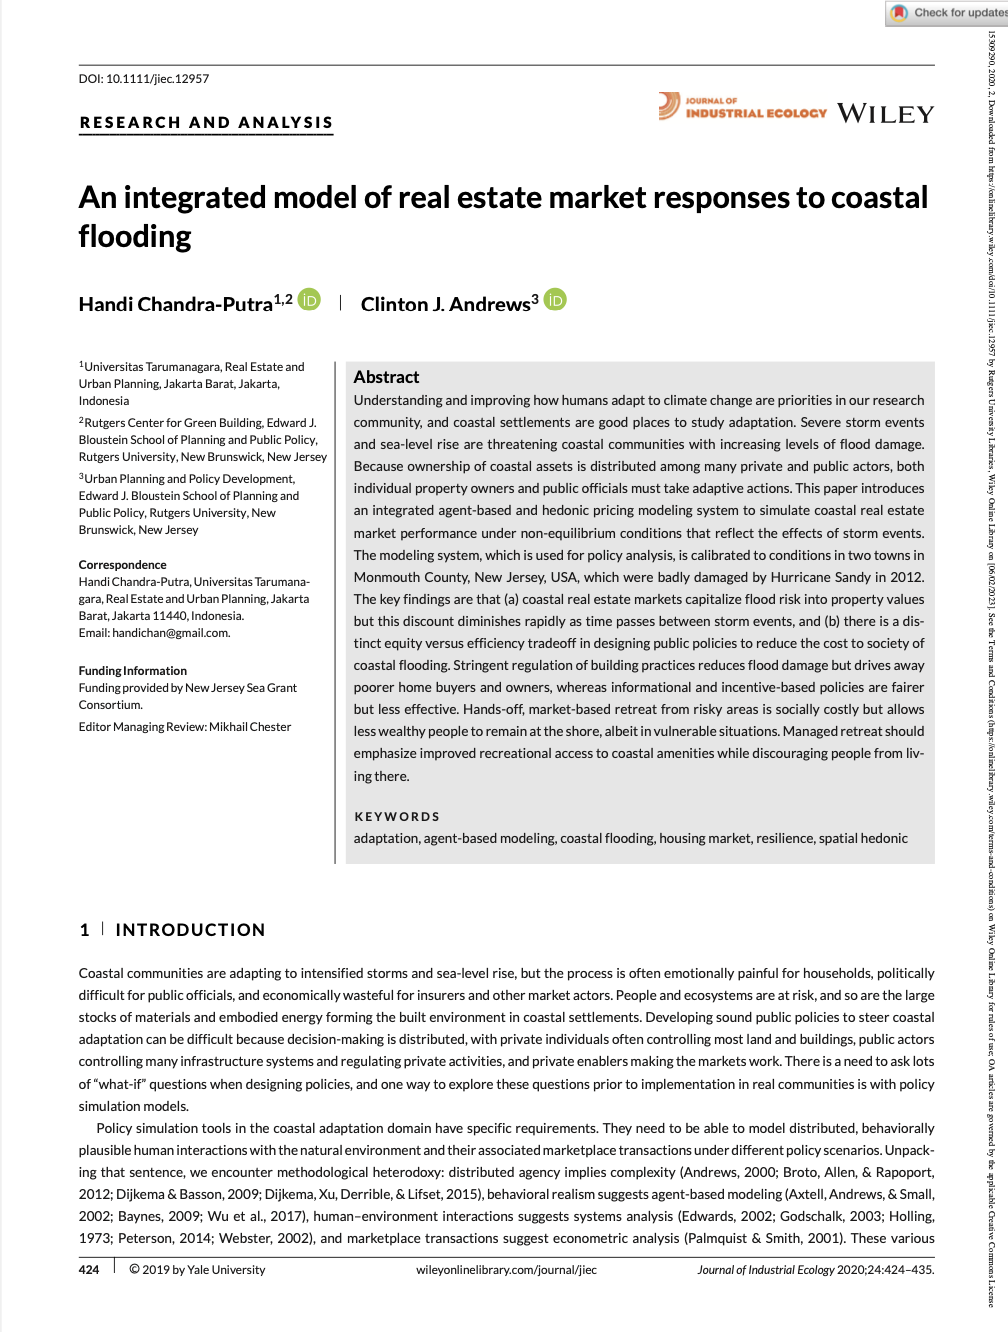 An integrated model of the real estate market responses to coastal flooding